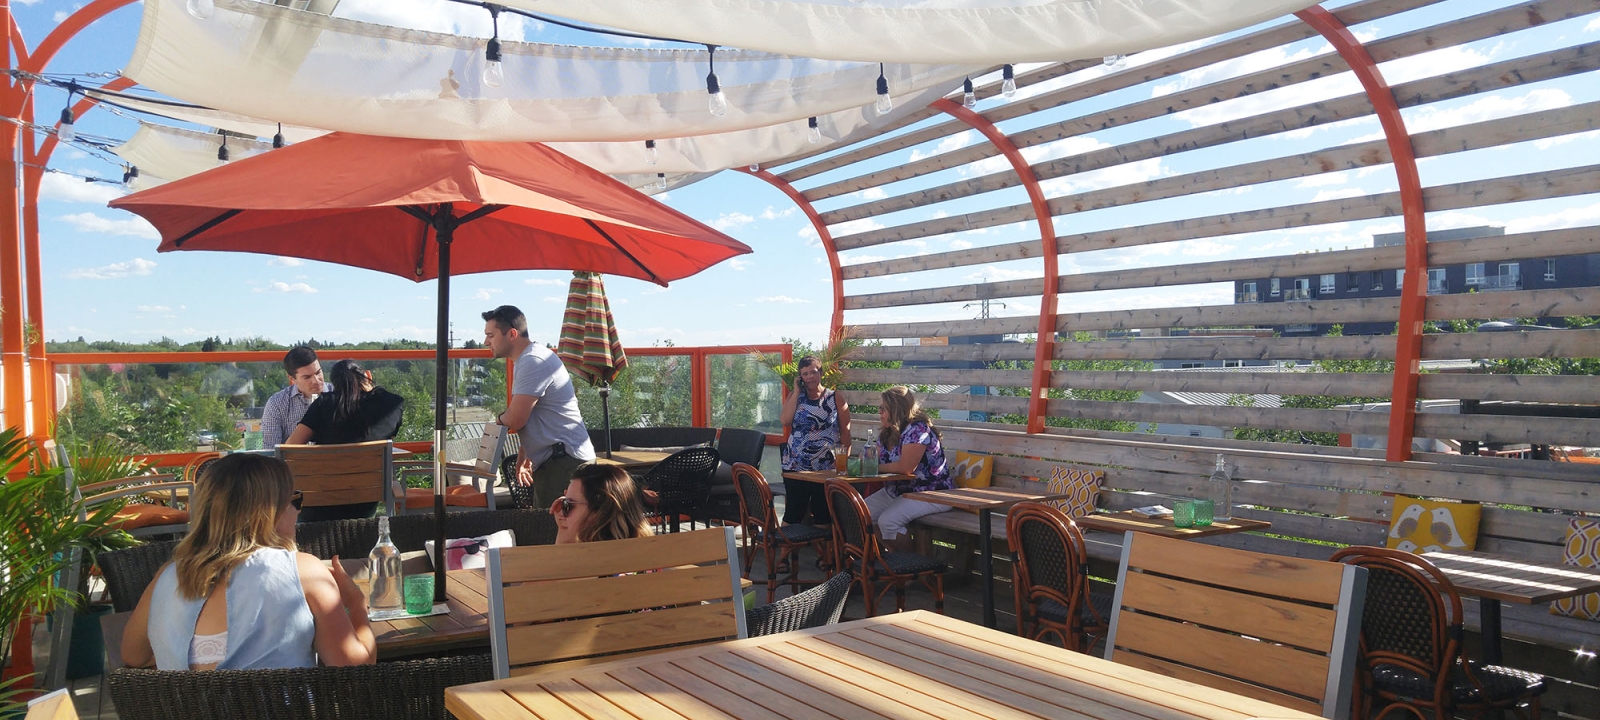 10 Patios to Check out this Summer in Saskatoon